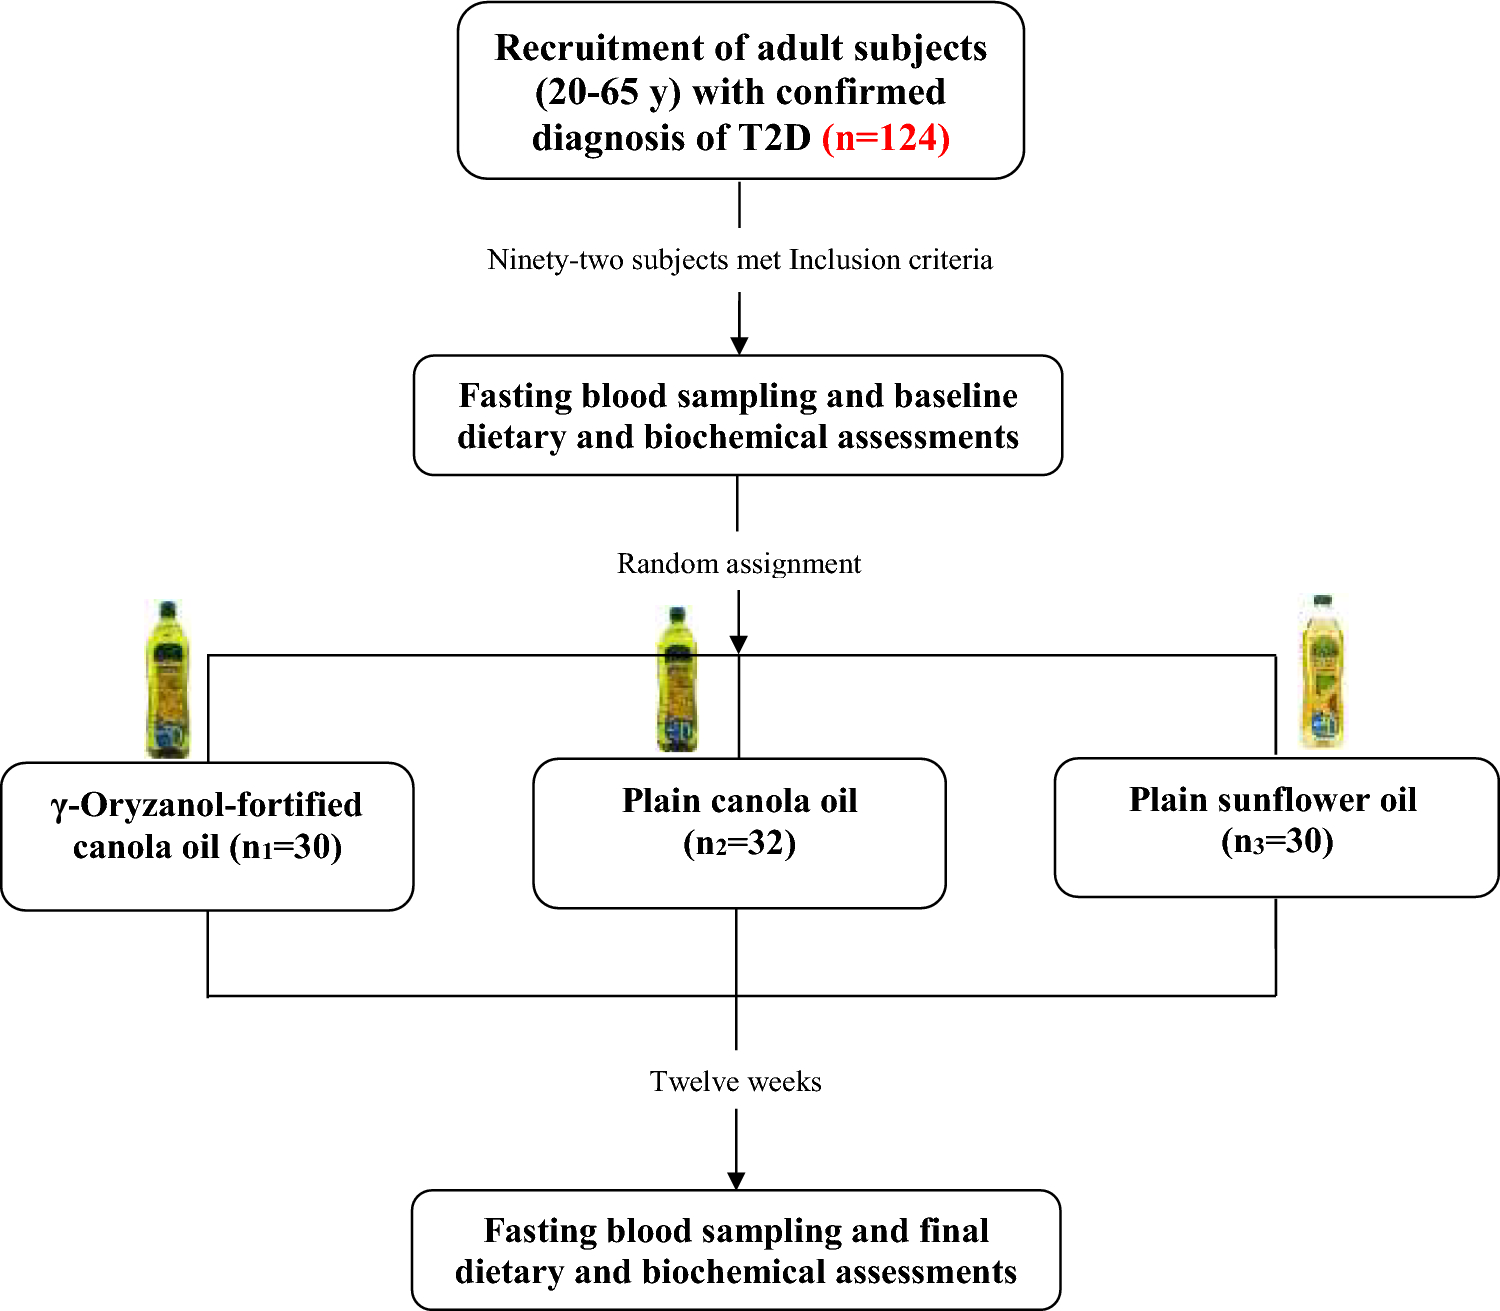 Added γ-oryzanol boosted anti-inflammatory effects of canola oil in adult subjects with type 2 diabetes: a randomized controlled clinical trial